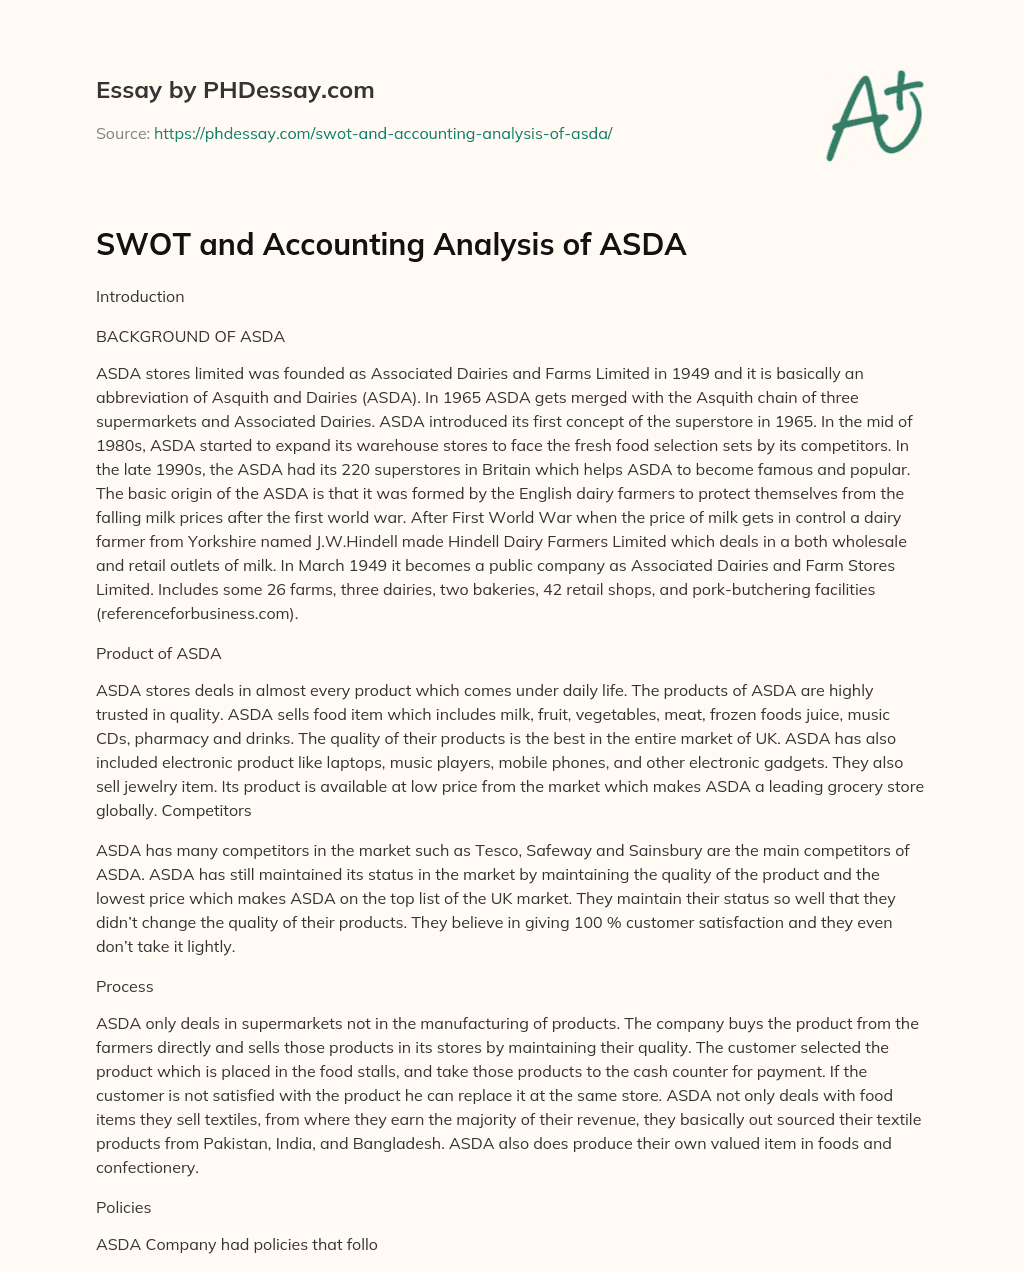 SWOT and Accounting Analysis of ASDA essay